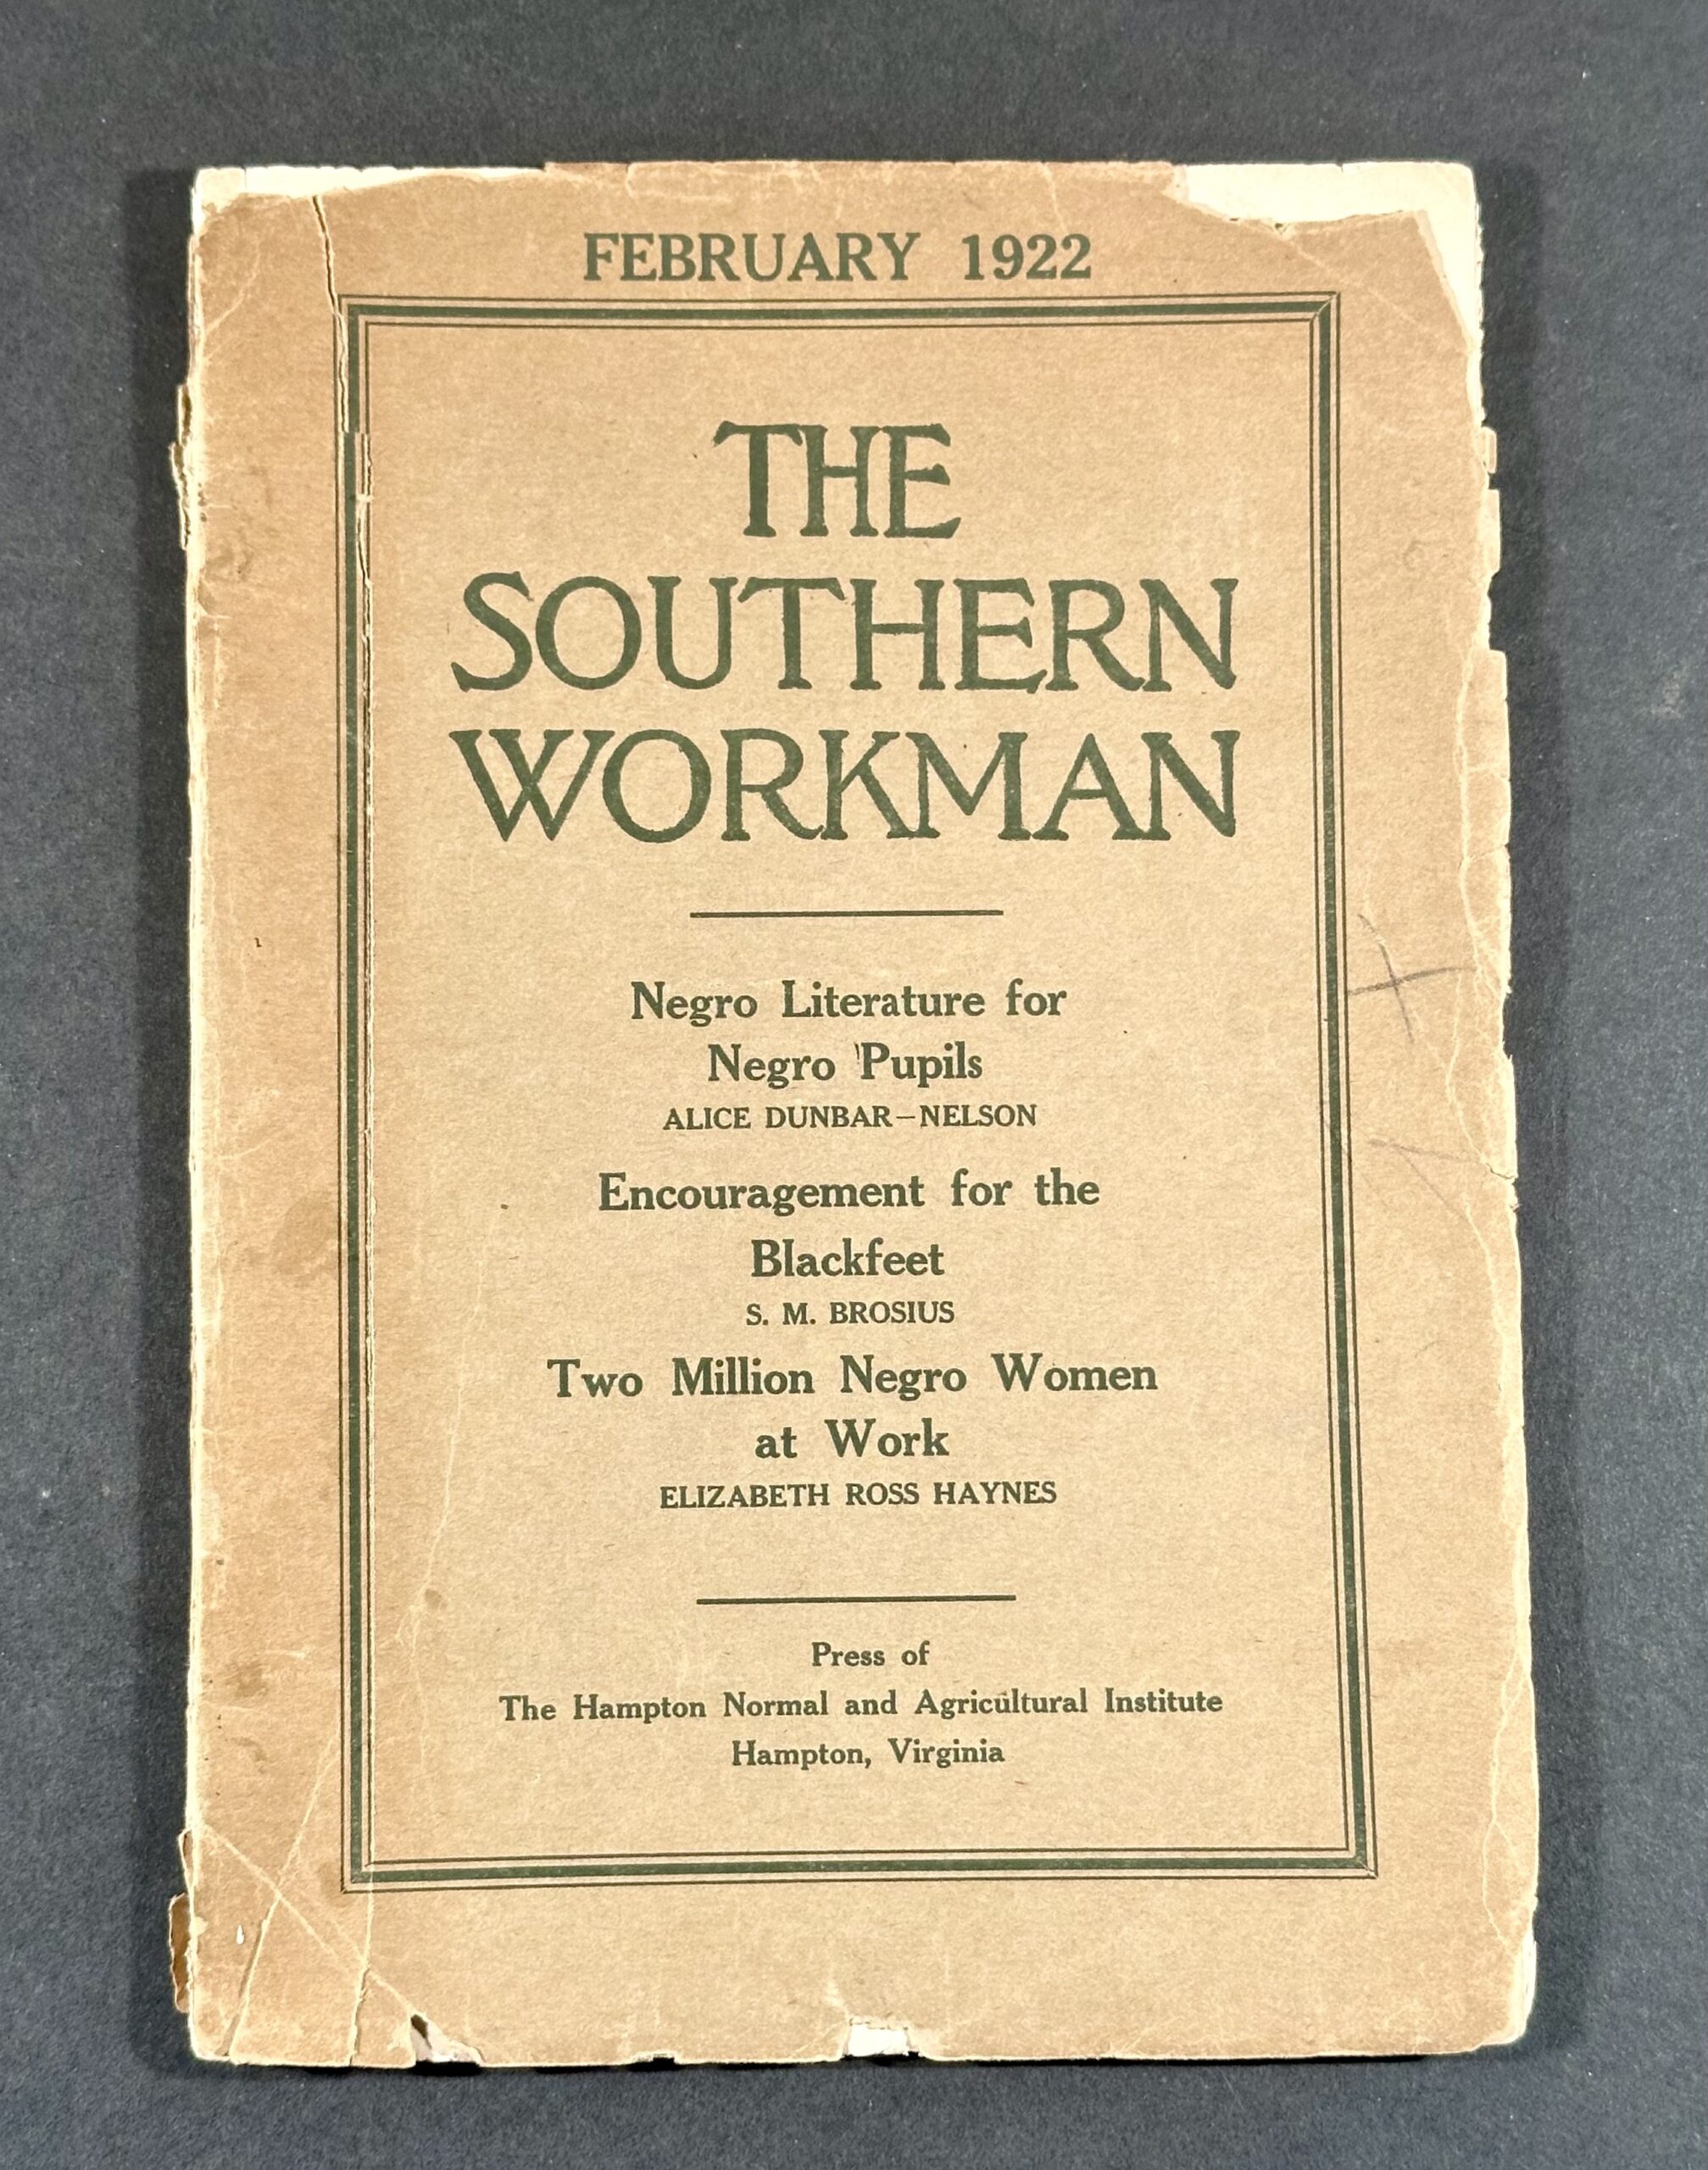 Hampton Institute. The Southern Workman, [February 1922], from the Alice Dunbar Nelson Papers collection